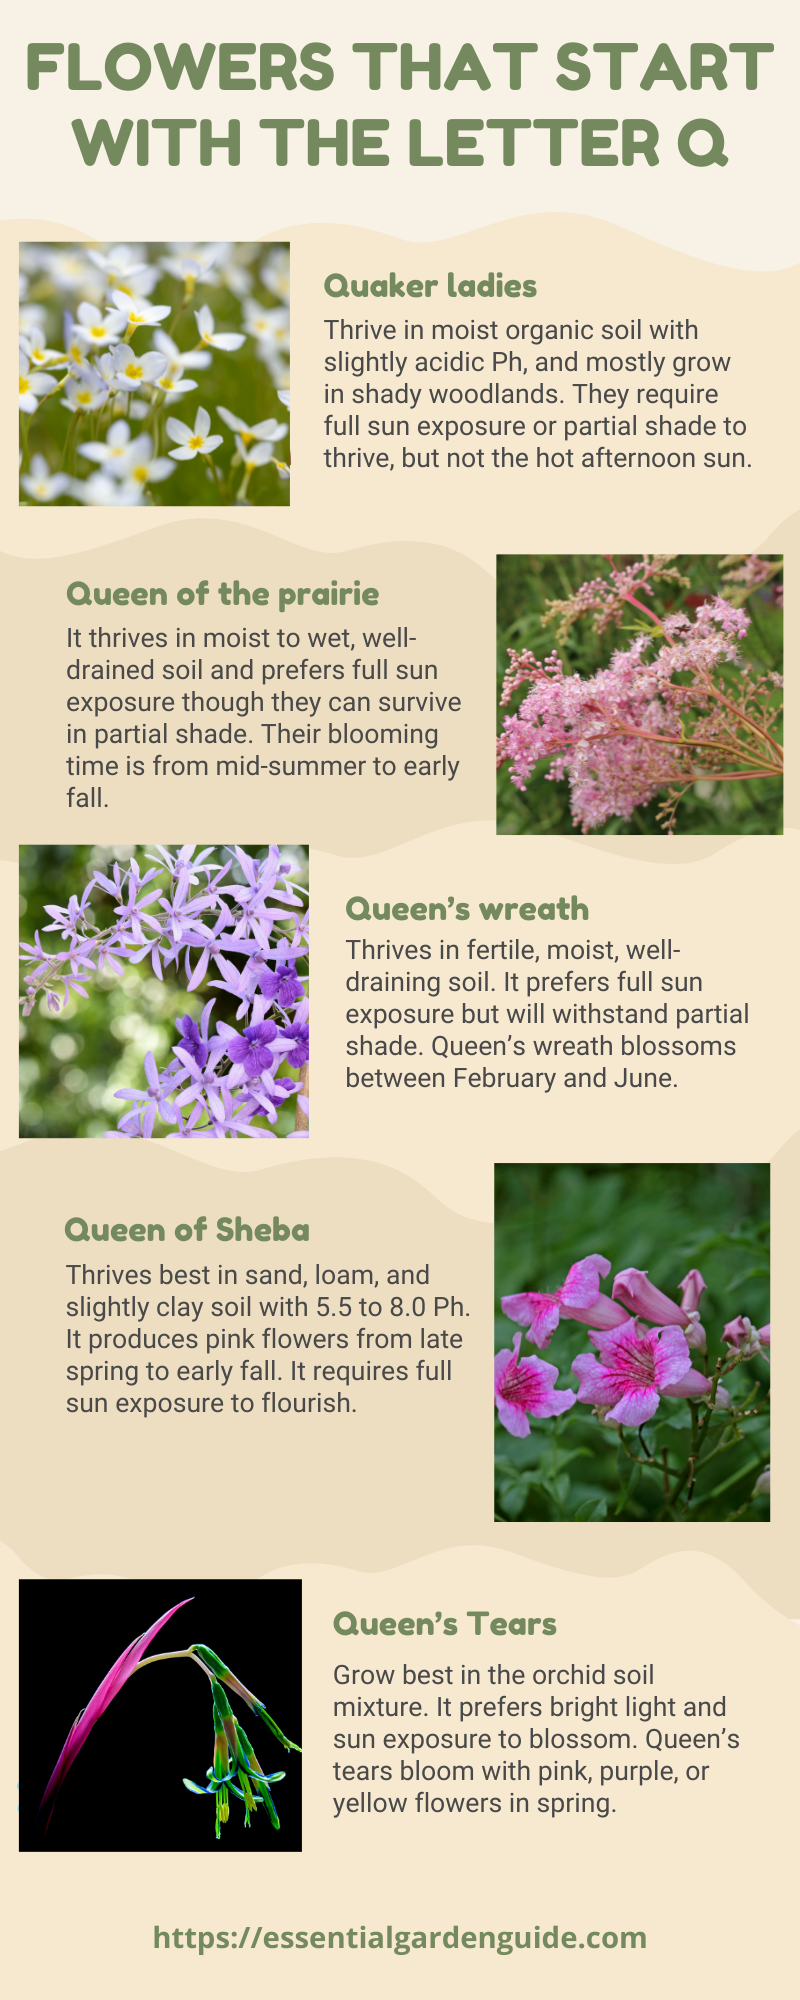 Infographic: Flowers That Start with the Letter Q